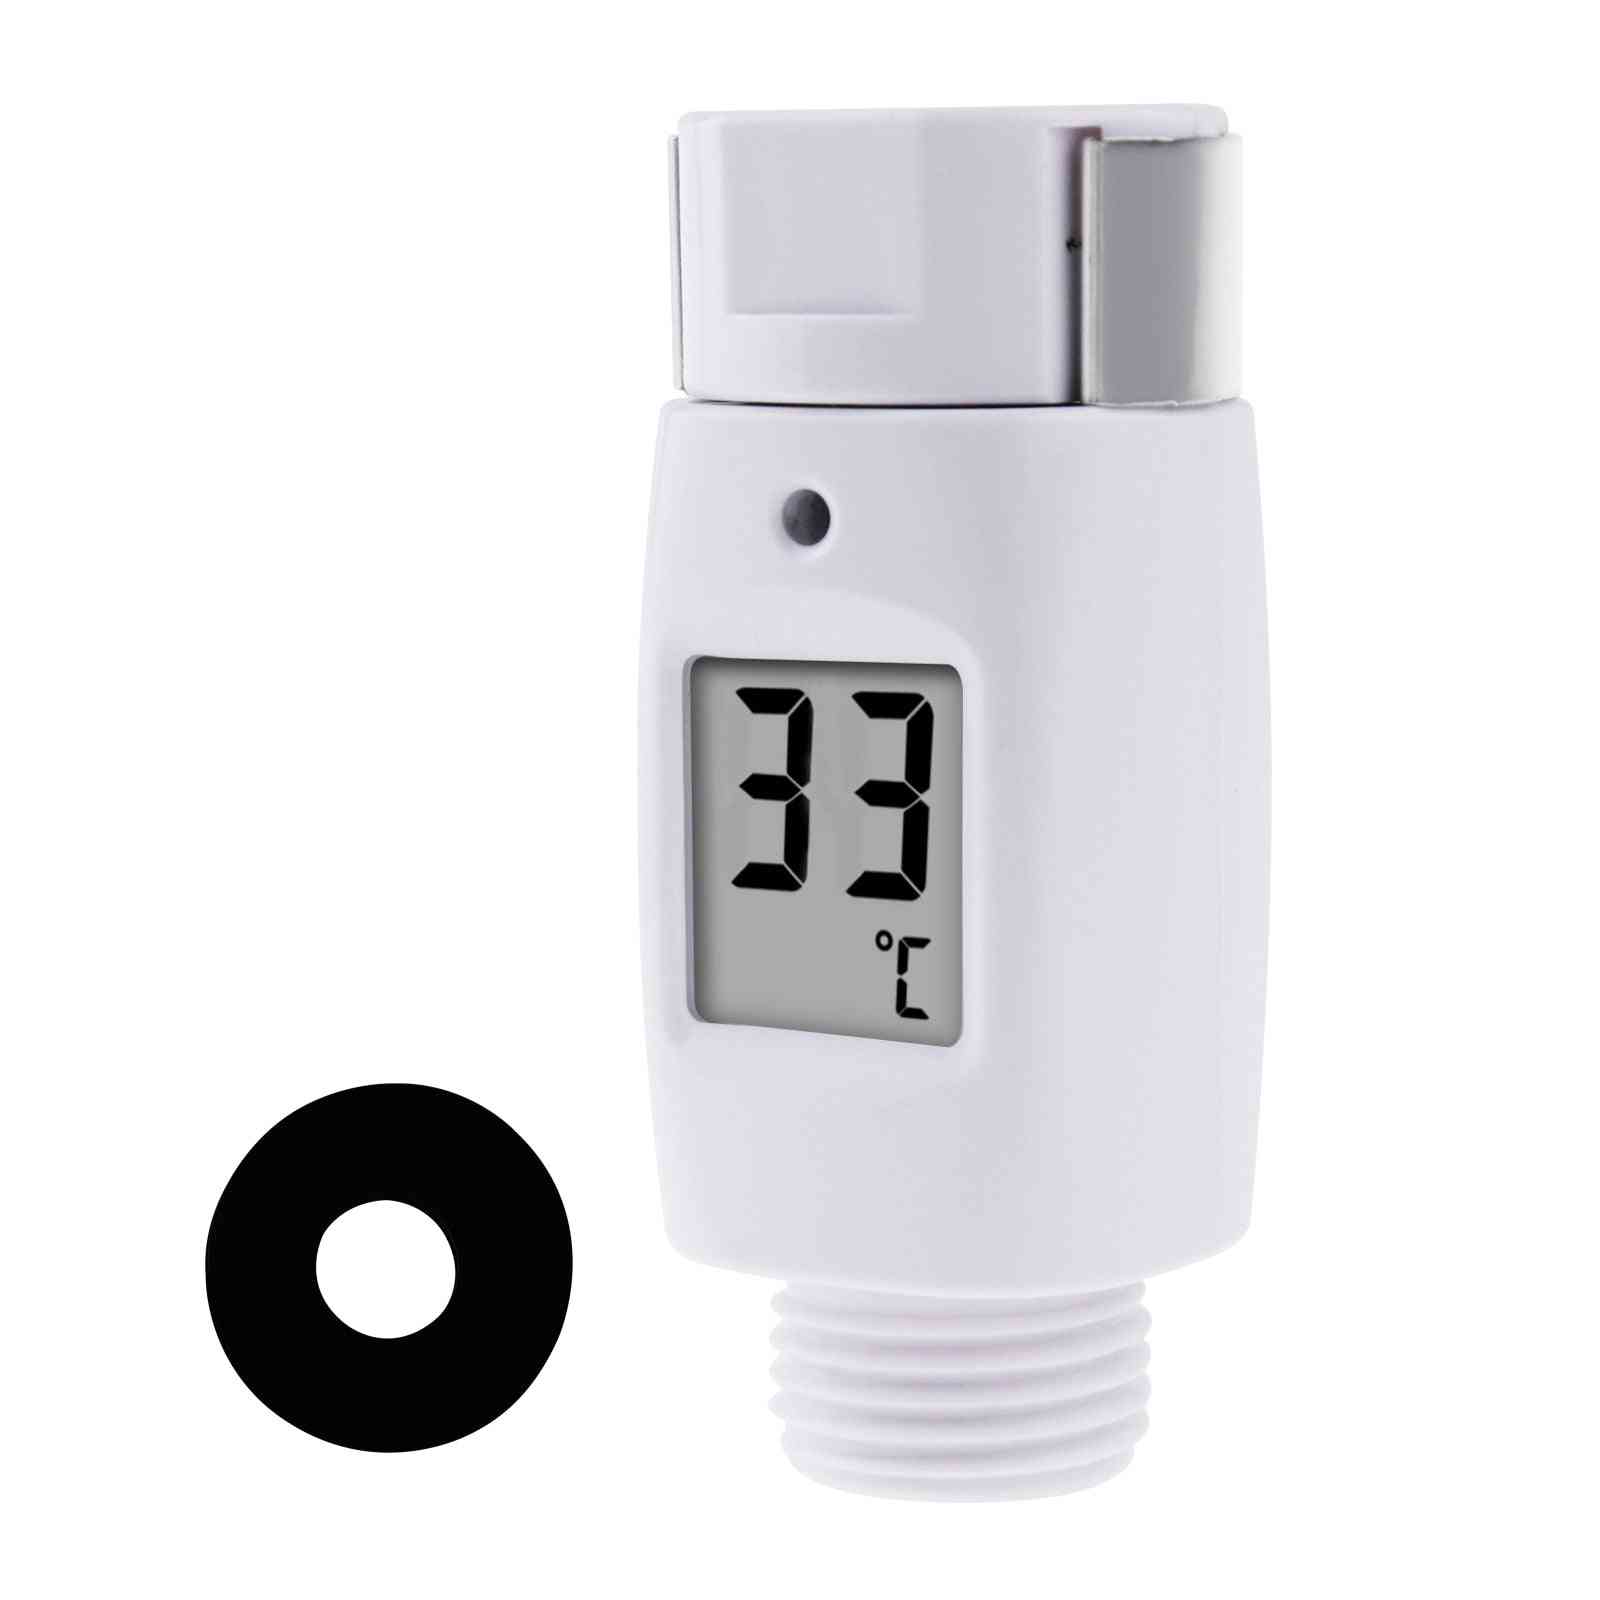 Waterproof Thermometer- W/ Alarm Alert, Hot-cold For Electric Showers